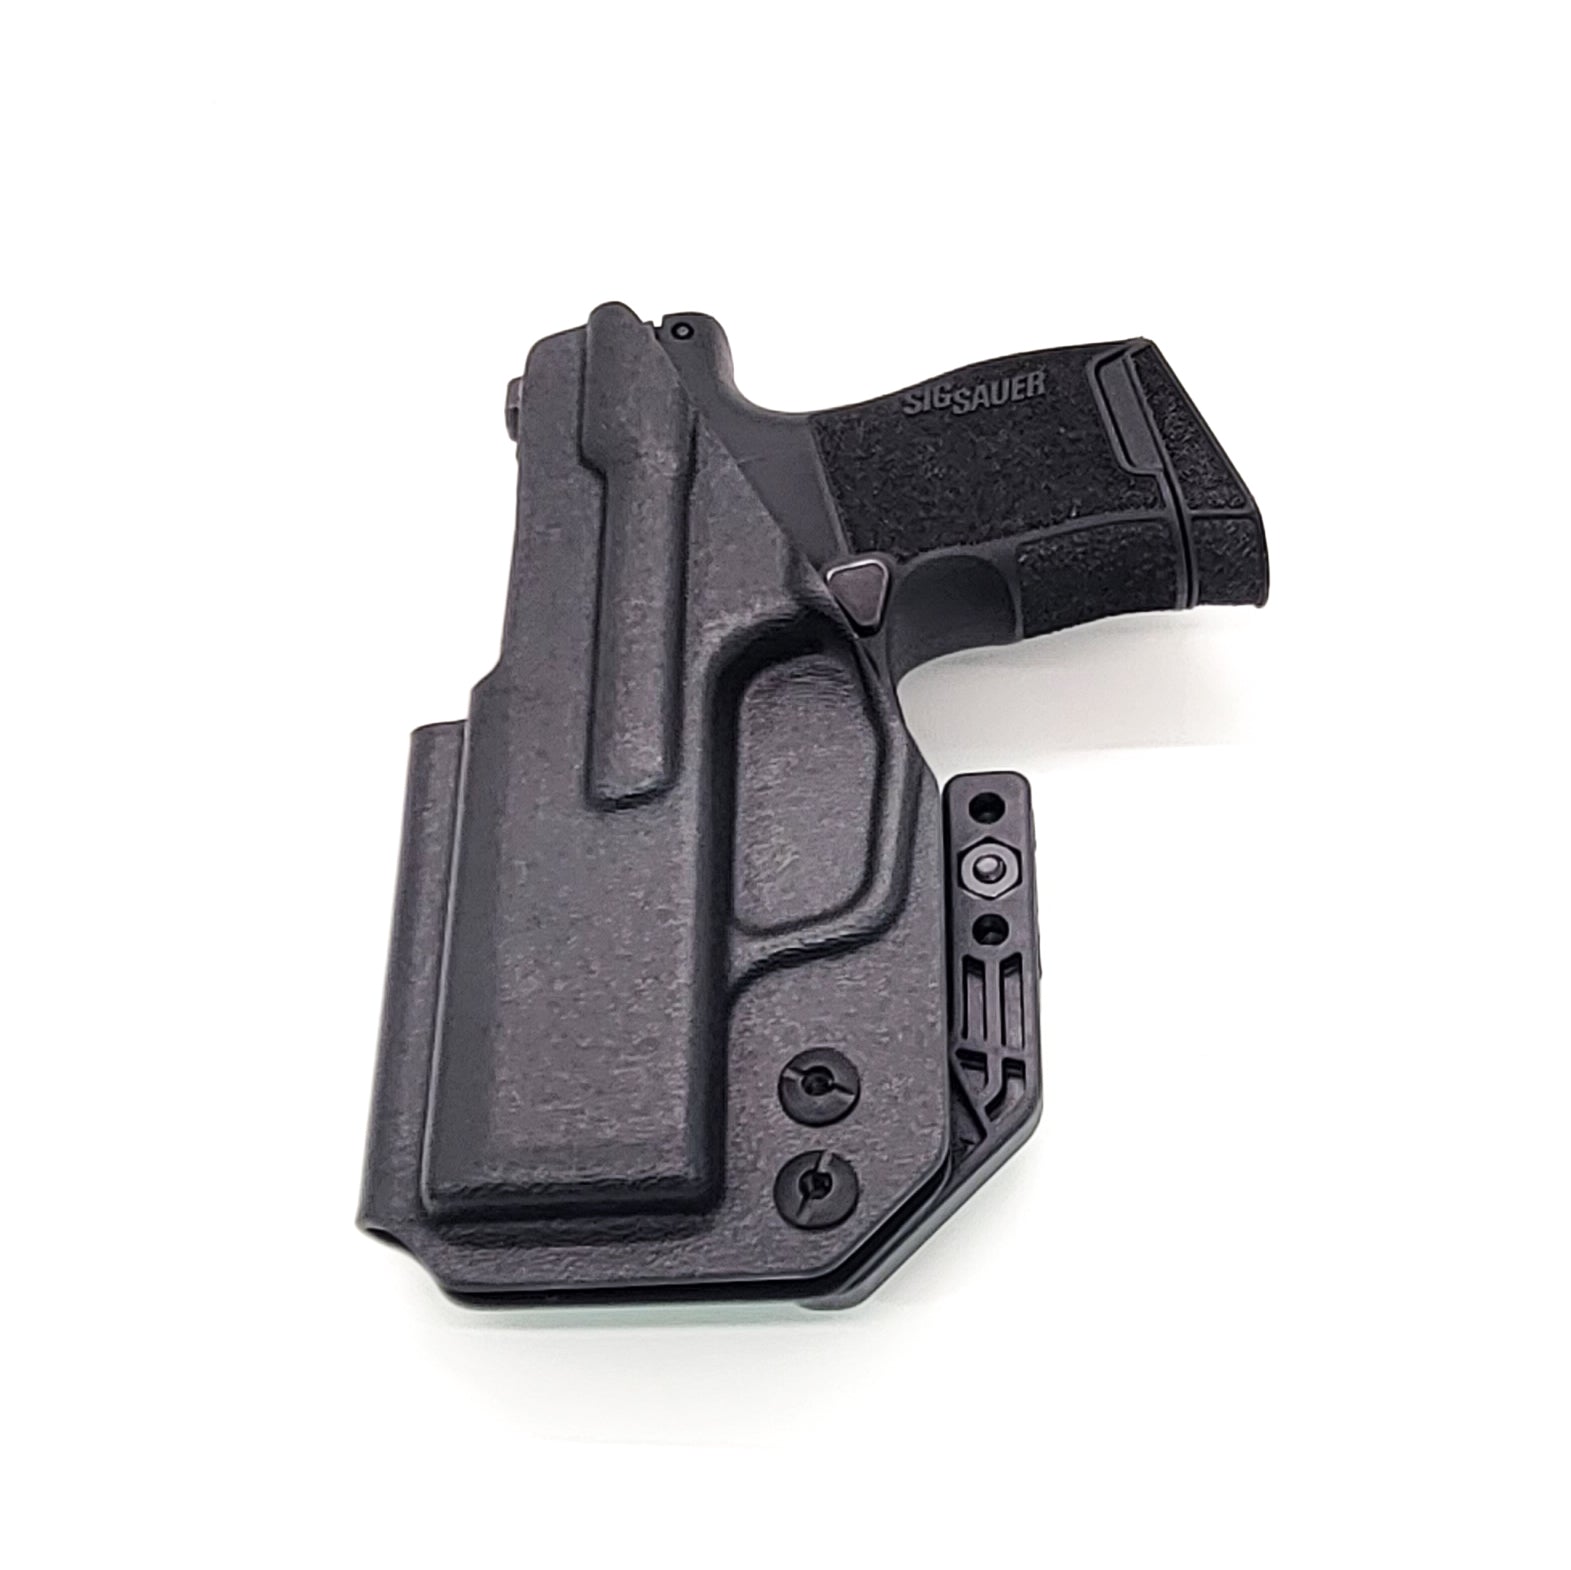 For the best, most comfortable, AIWB, IWB, Kydex Inside Waistband Holster Designed to fit the Sig Sauer P365-380 pistol, shop Four Brothers 4BROS holsters. Adjustable retention, high sweat guard, smooth edges, and minimal material for improved comfort and concealment. Made in the USA P 365 380 